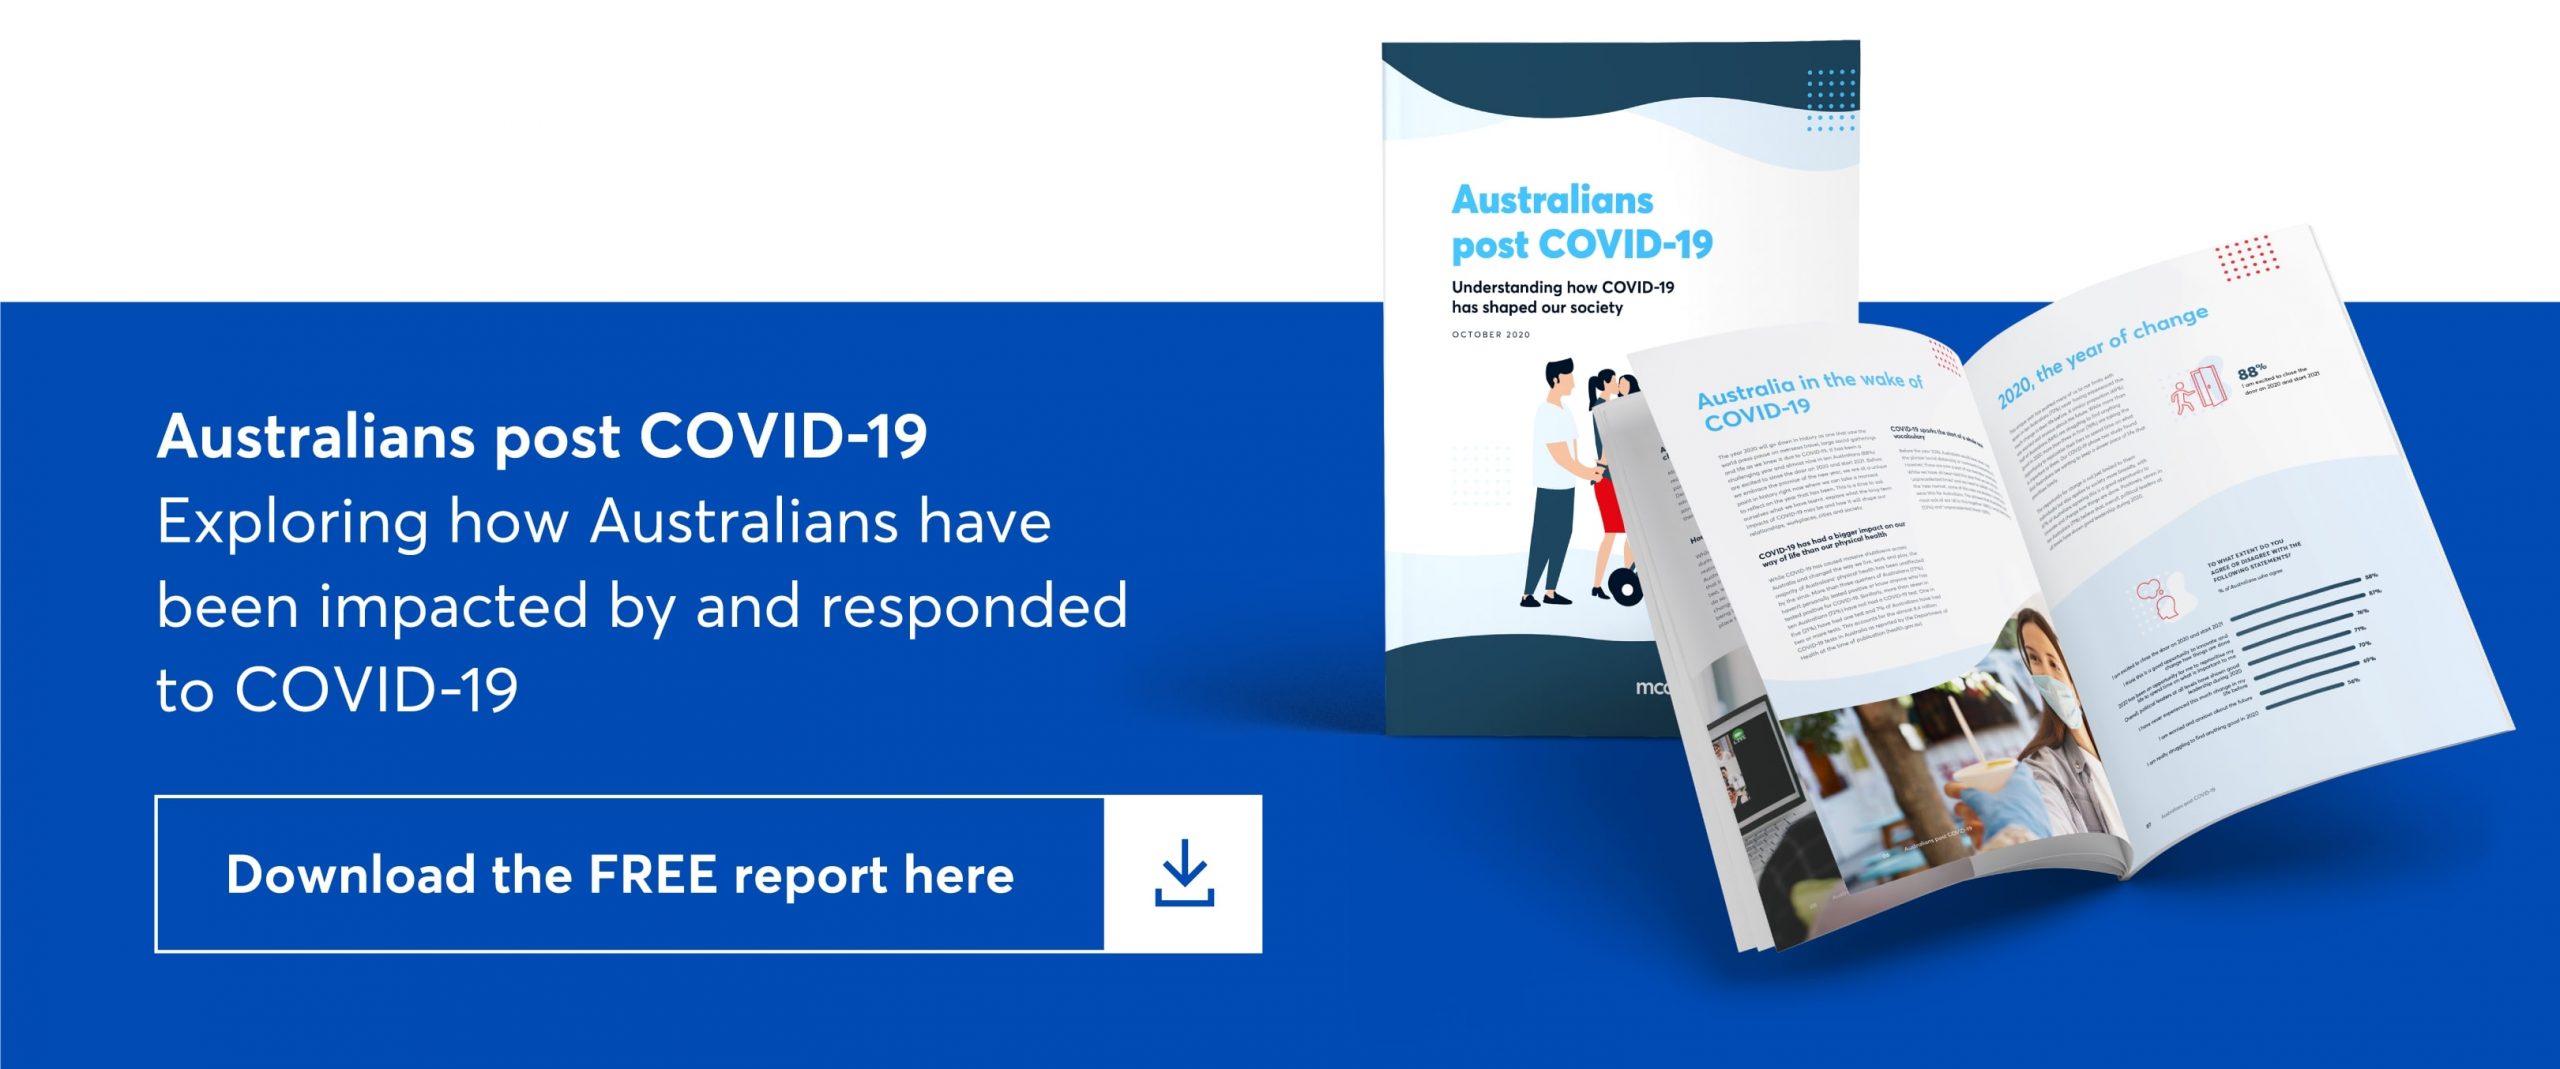 australians post covid - exploring how australians have been impacted by and responded to covid-19. download the free report here